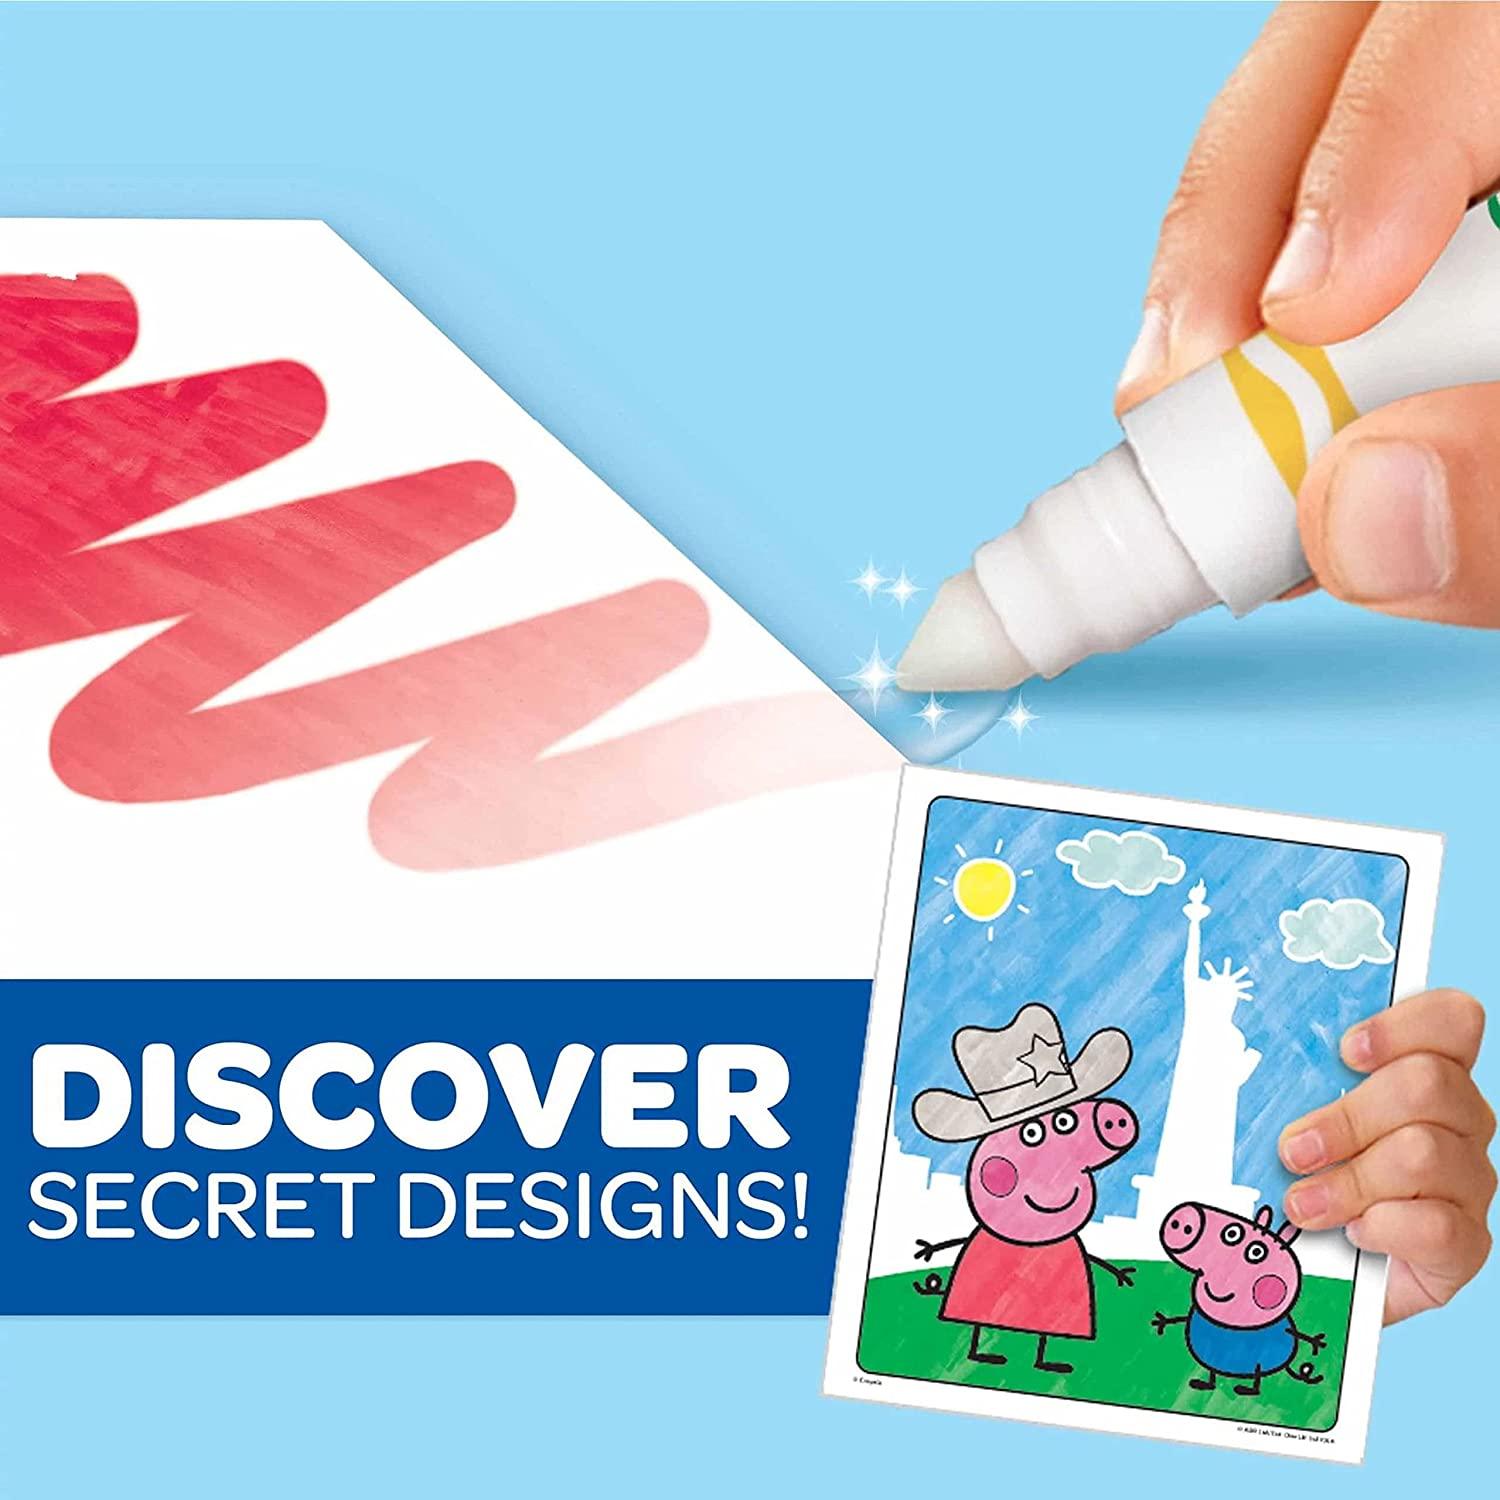 Crayola Peppa Pig Coloring Pages & Markers, Color Wonder Mess Free Coloring, Easter Basket Stuffers